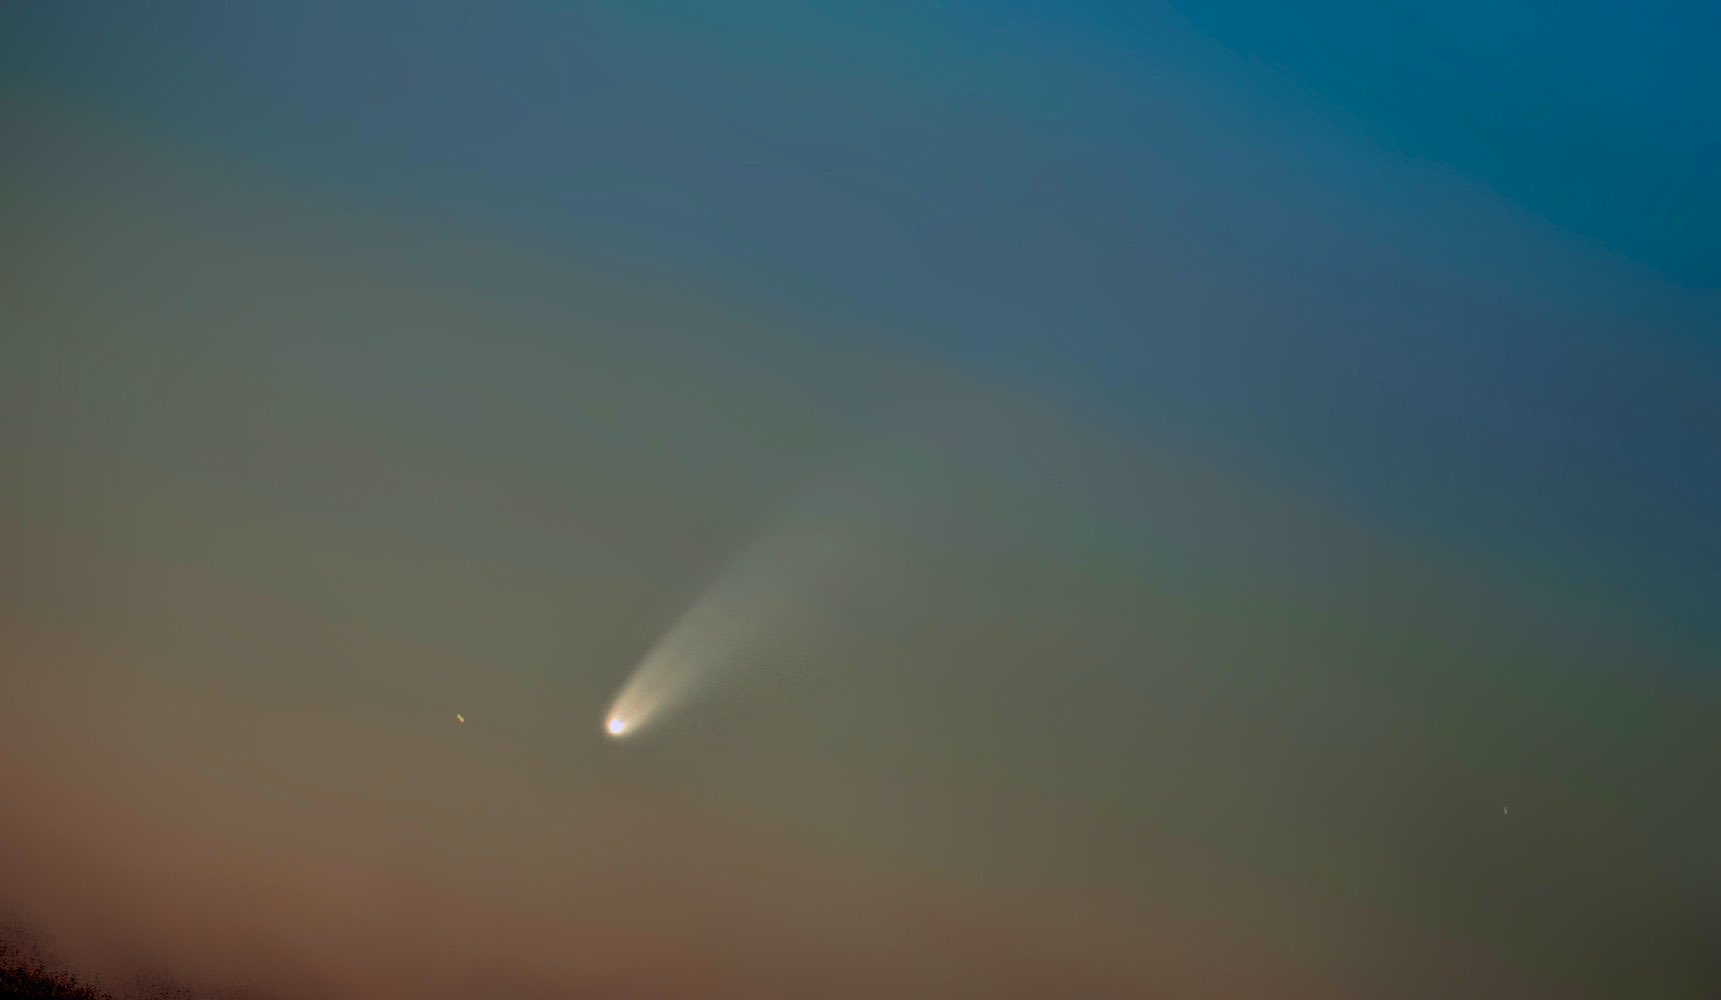 You are currently viewing Neowise Comet C/2020 F3 Can Be Seen With Naked Eye